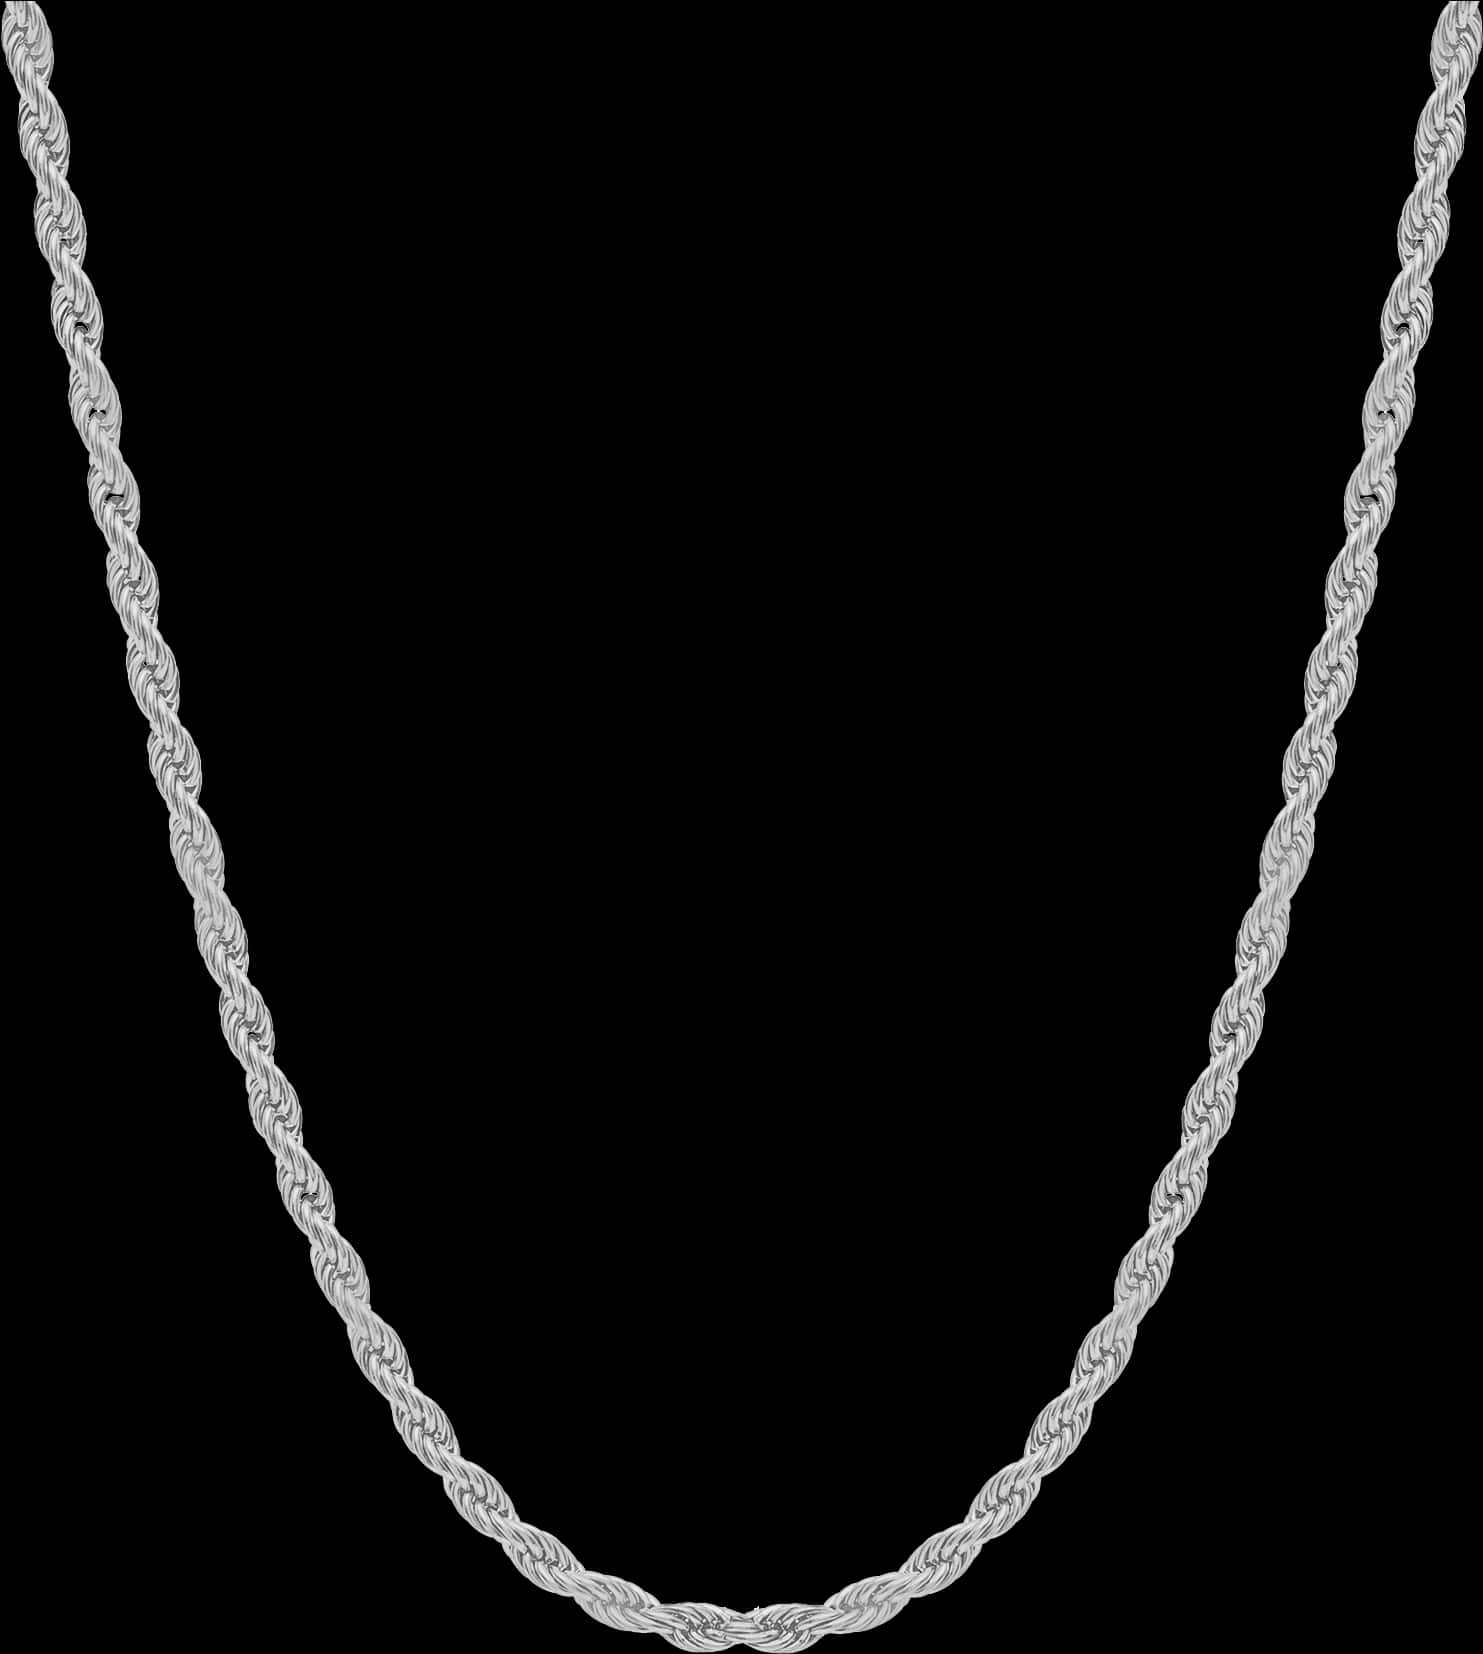 Silver Twisted Rope Chain PNG